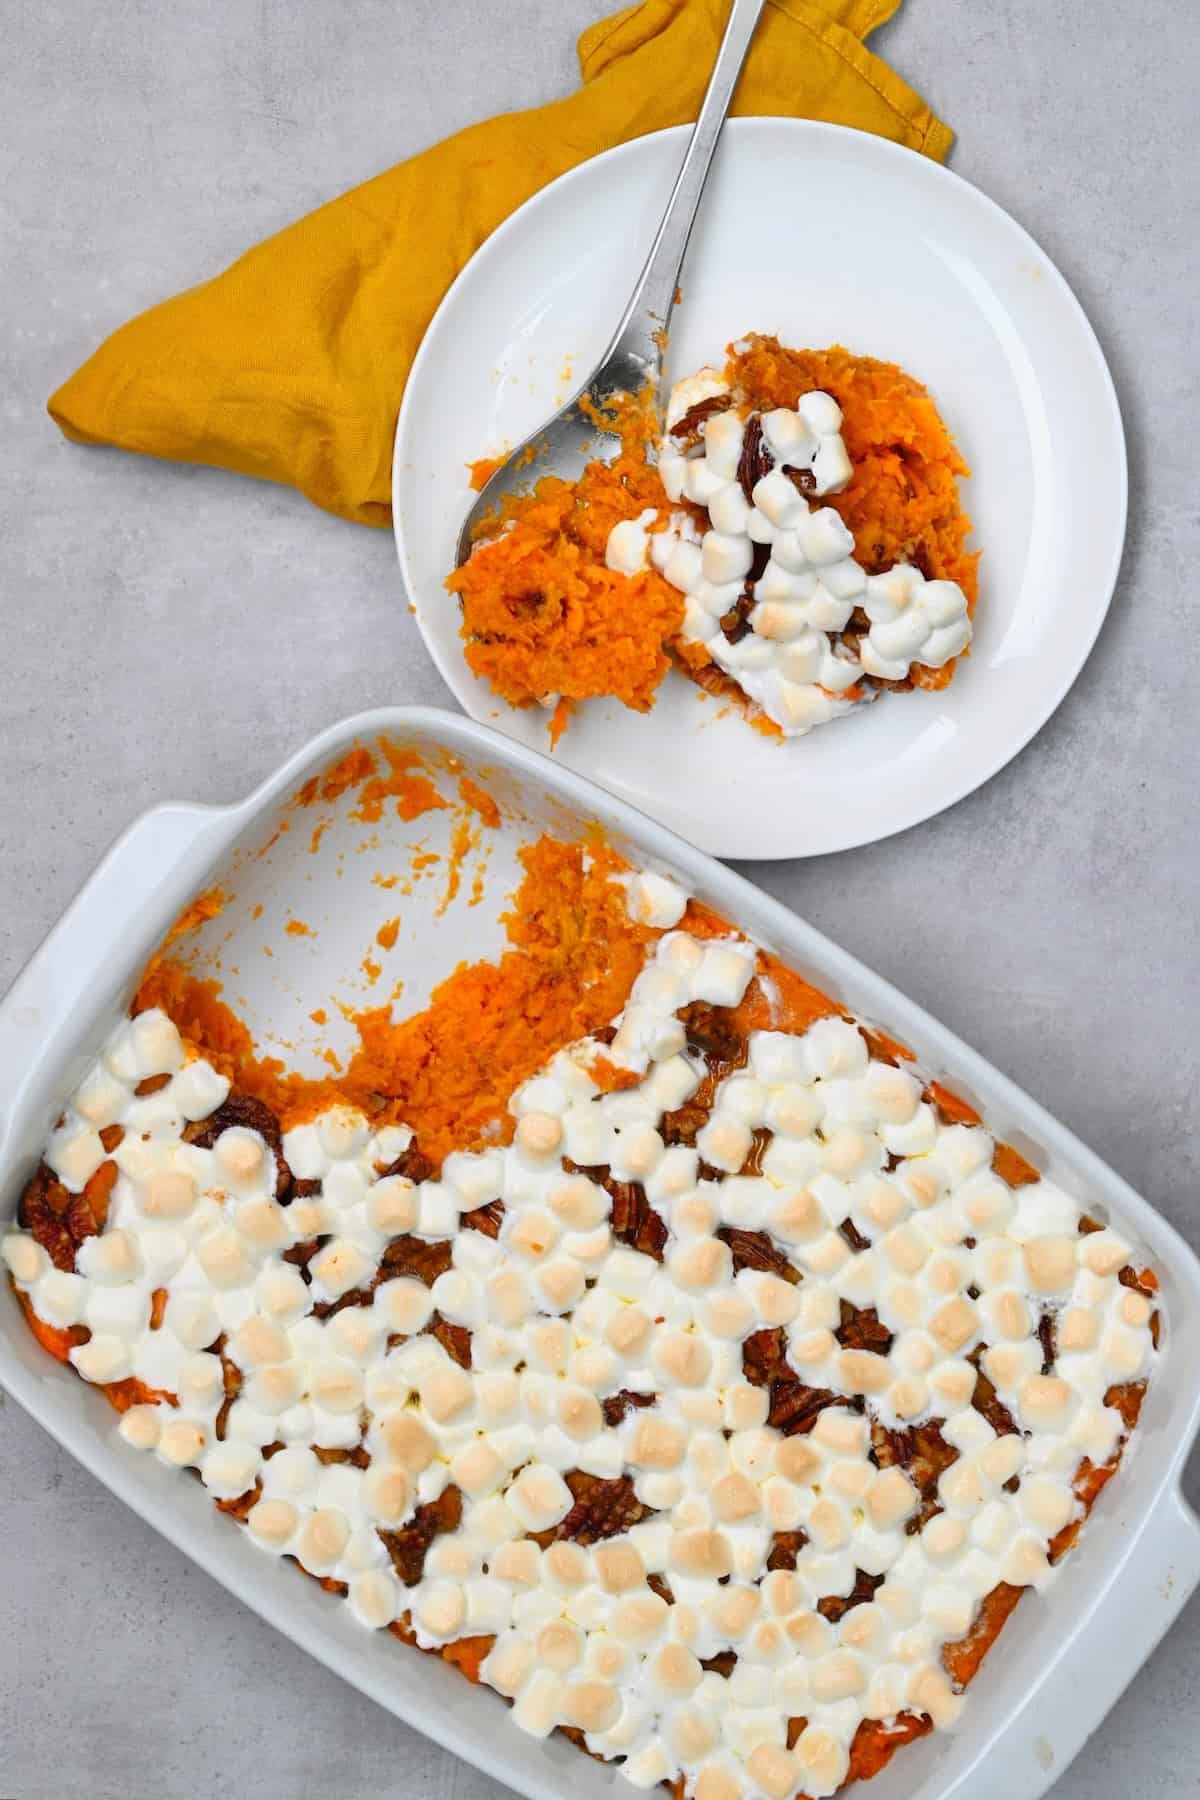 Sweet potato casserole in a baking dish and on a plate